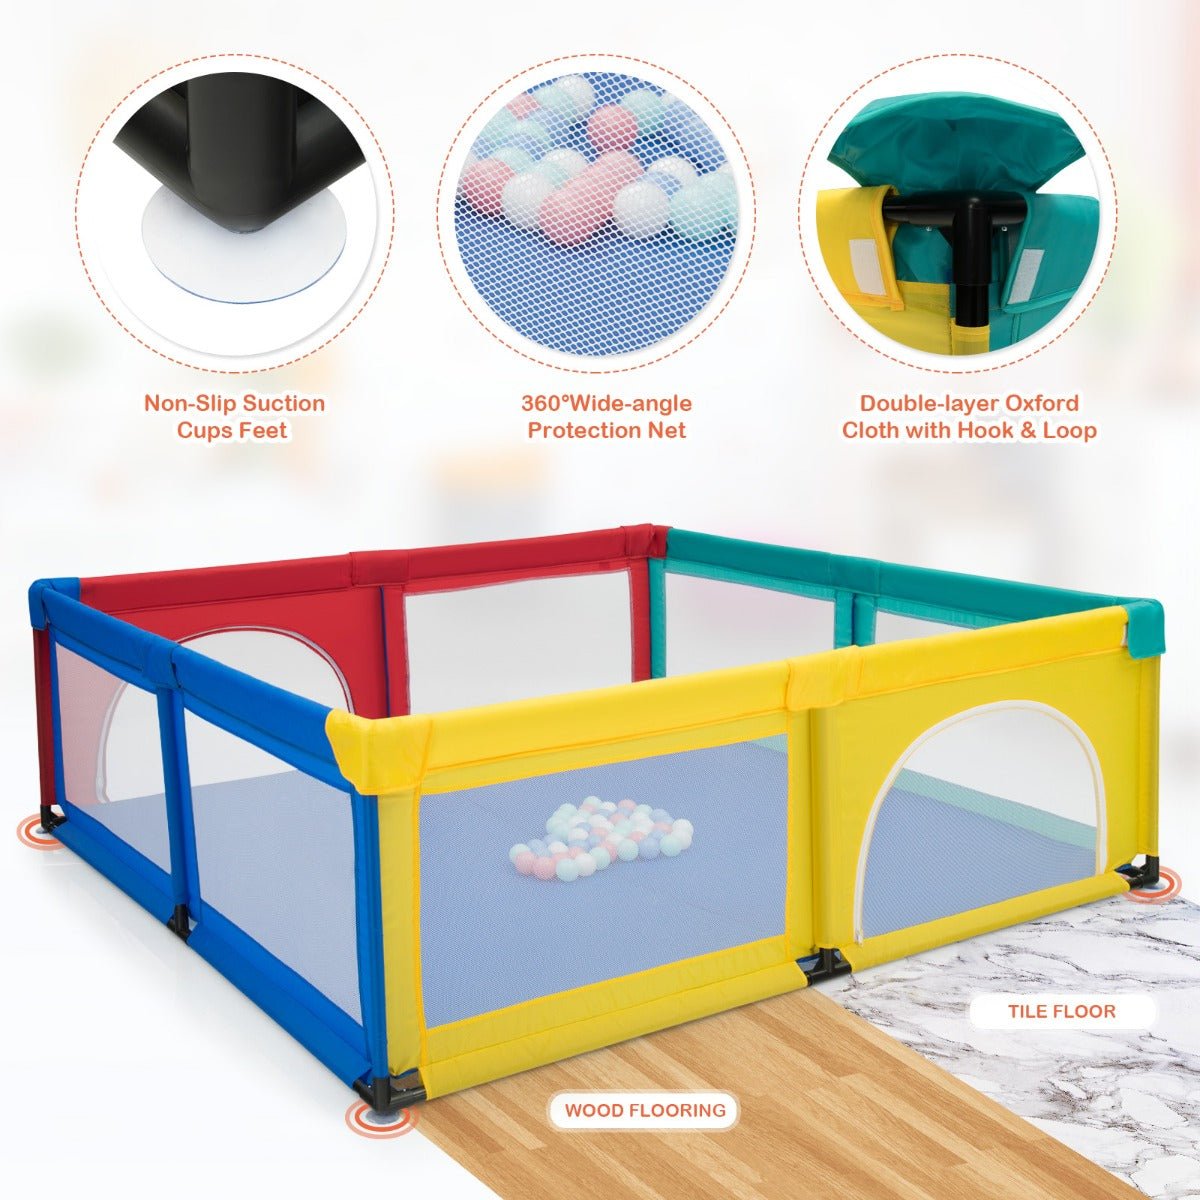 Multicolour Baby Playpen with Extra Large Size: Safety Gates & Mesh Walls